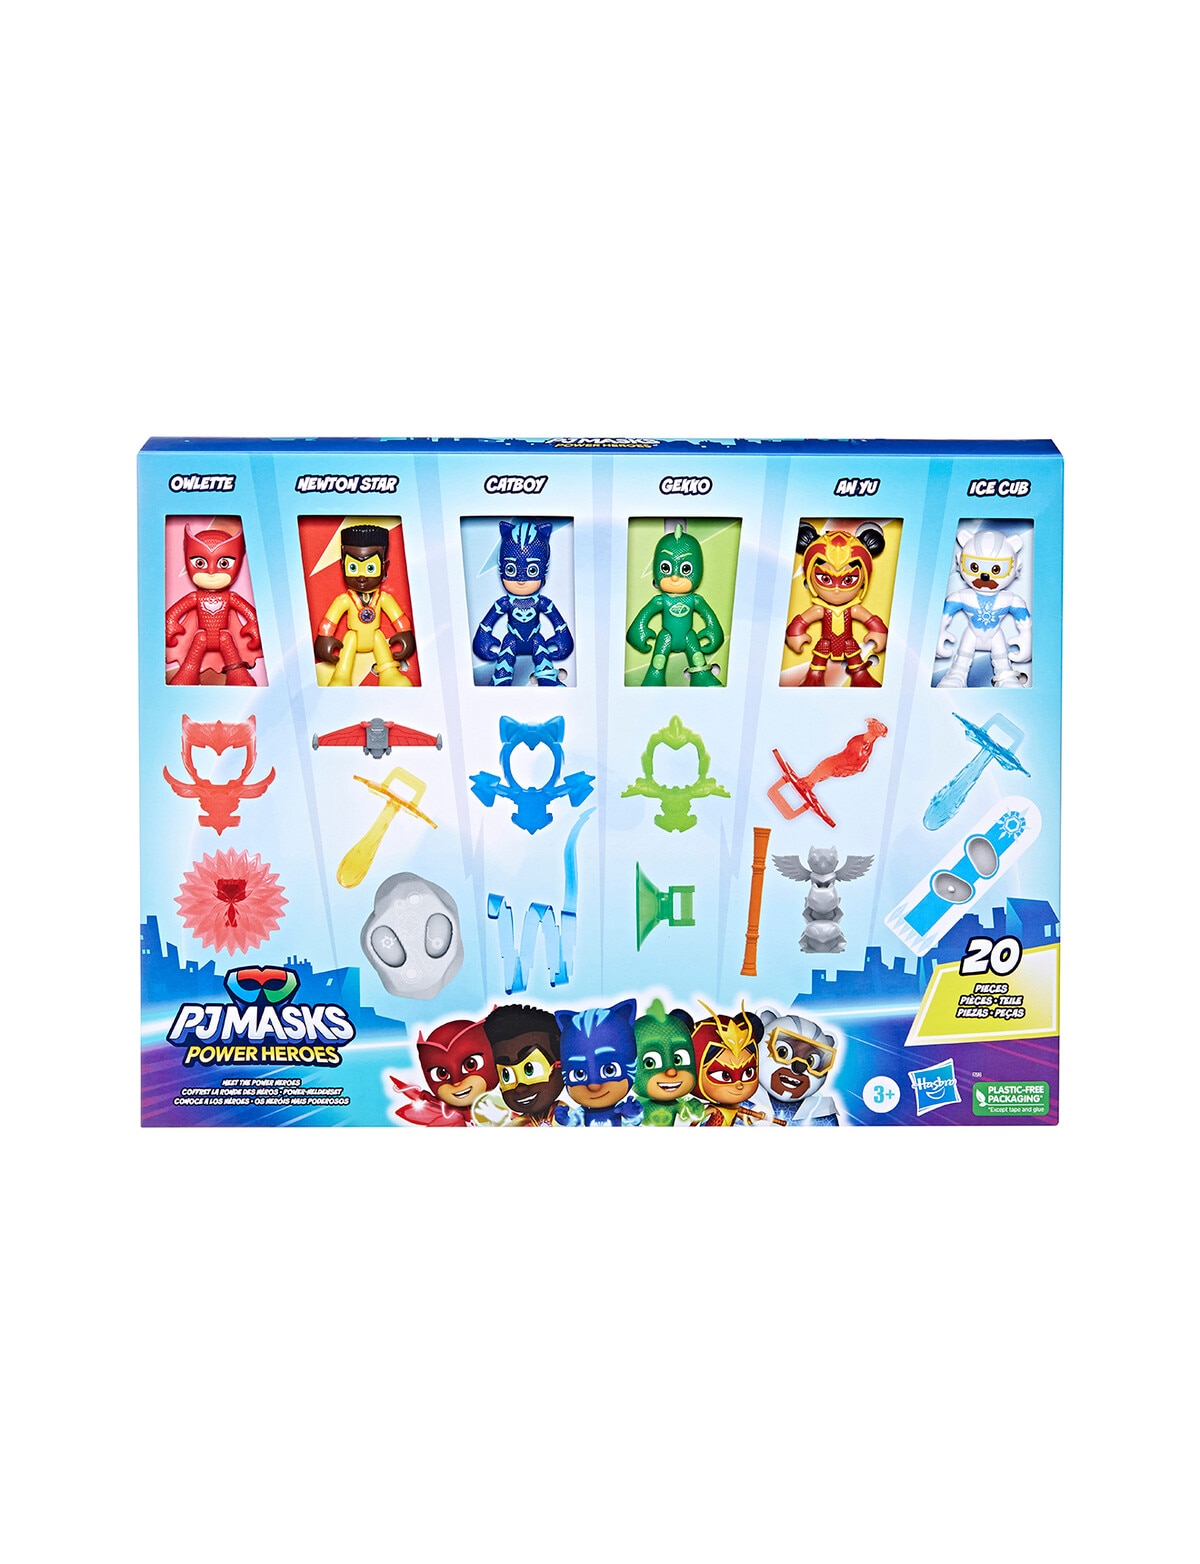  PJ Masks Power Heroes Meet The Power Heroes Figure Set with 6  Figures and 14 Accessories, Preschool Toys for Kids 3 Years and Up : Toys &  Games